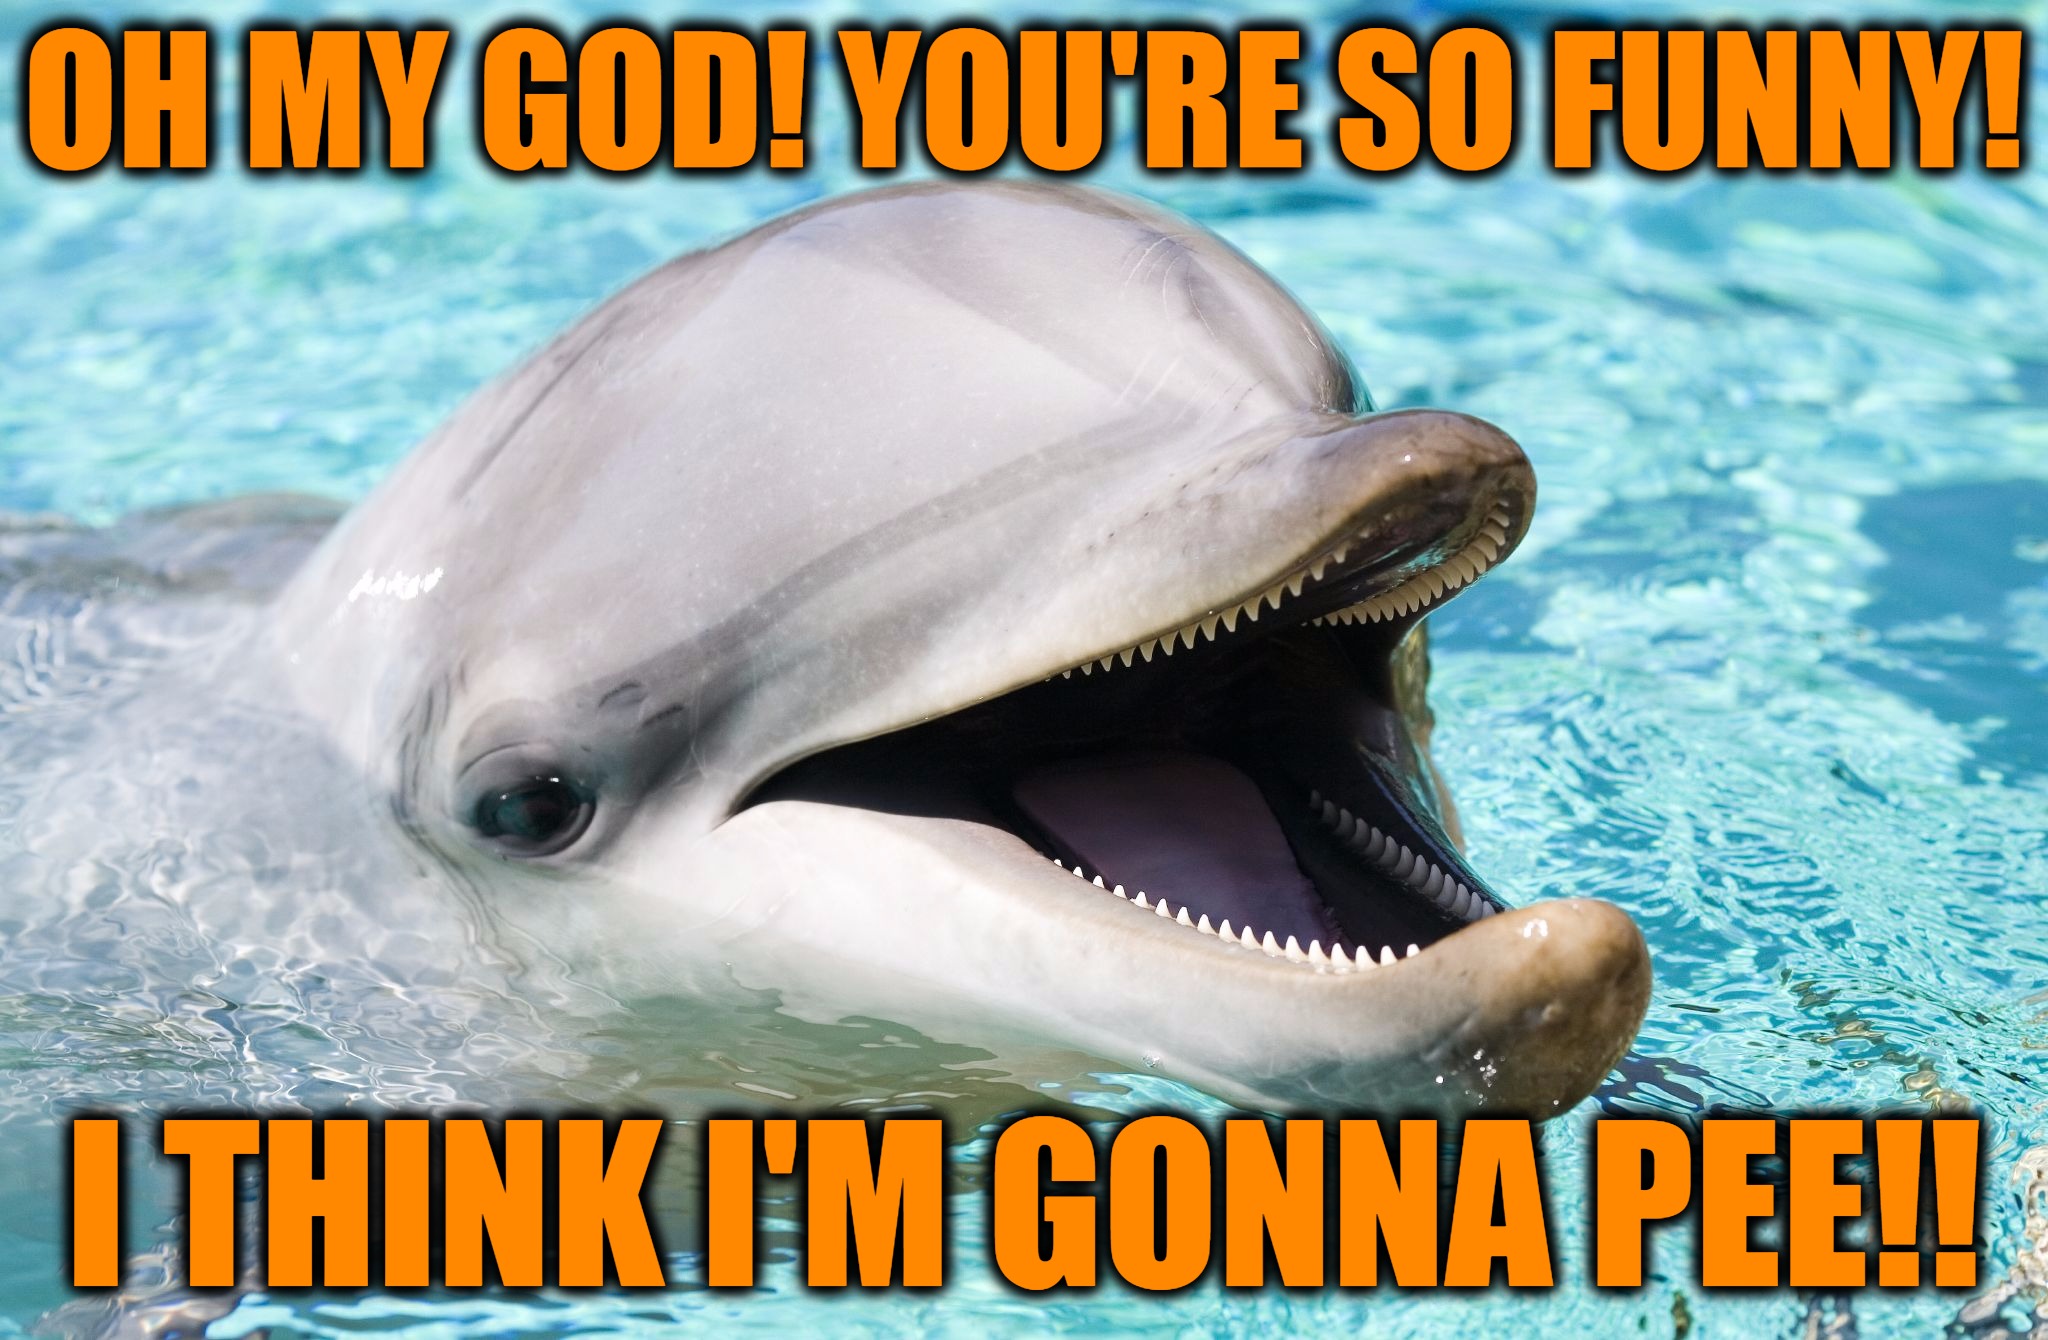 Peepee dolphin... | OH MY GOD! YOU'RE SO FUNNY! I THINK I'M GONNA PEE!! | image tagged in memes,laughing dolphin,don't pee in the pool,bladder control,oh my god,headfoot | made w/ Imgflip meme maker